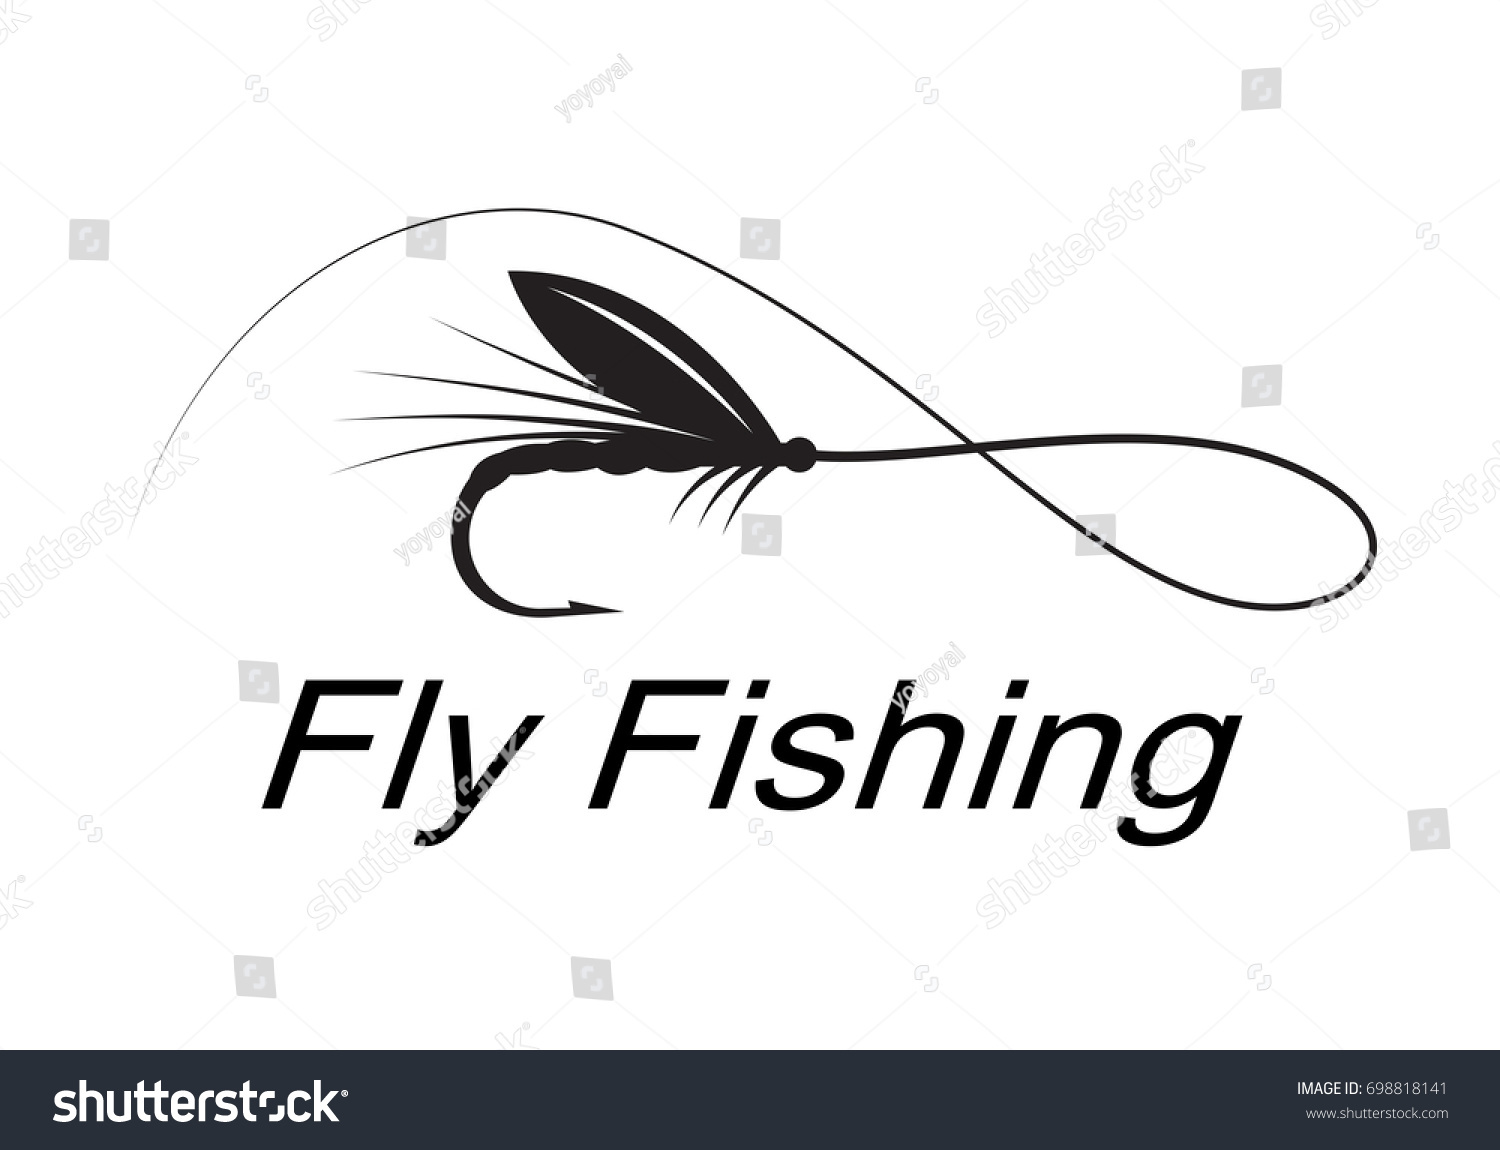 Download Graphic Fly Fishing Vector Stock Vector 698818141 ...